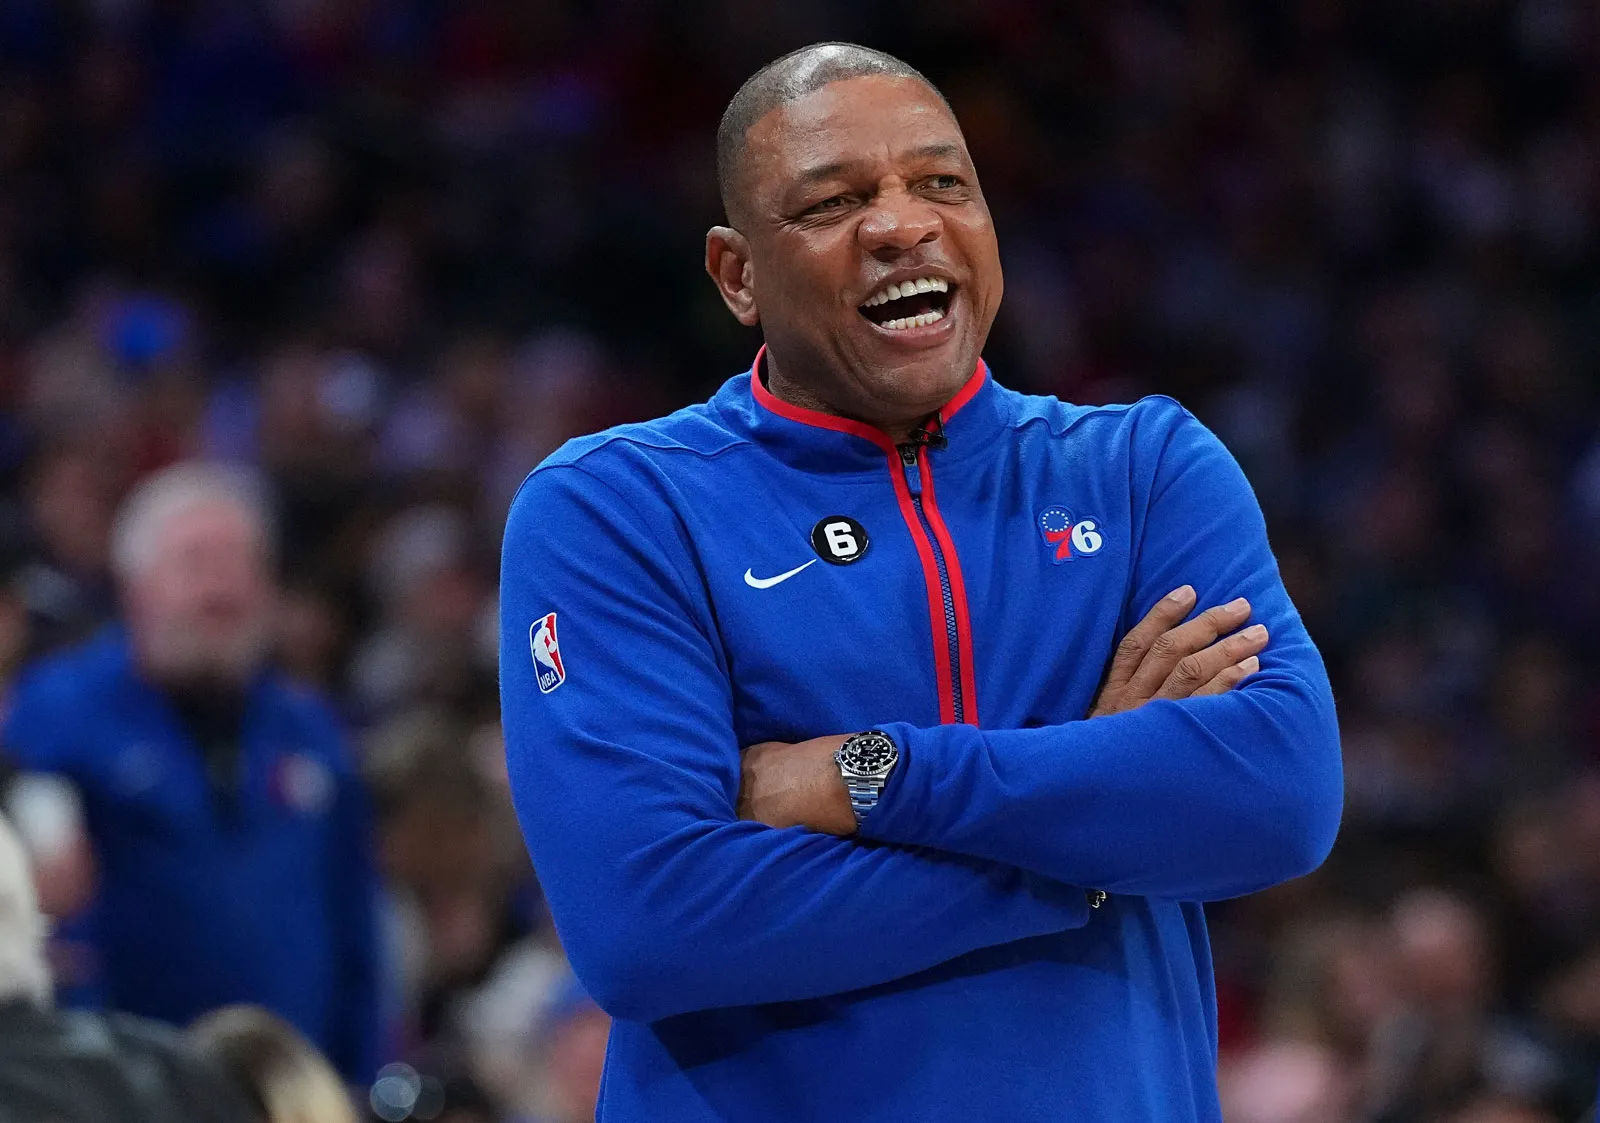 NBA fans laughed at President Biden’s secret meeting with Doc Rivers: “Two frauds meeting”